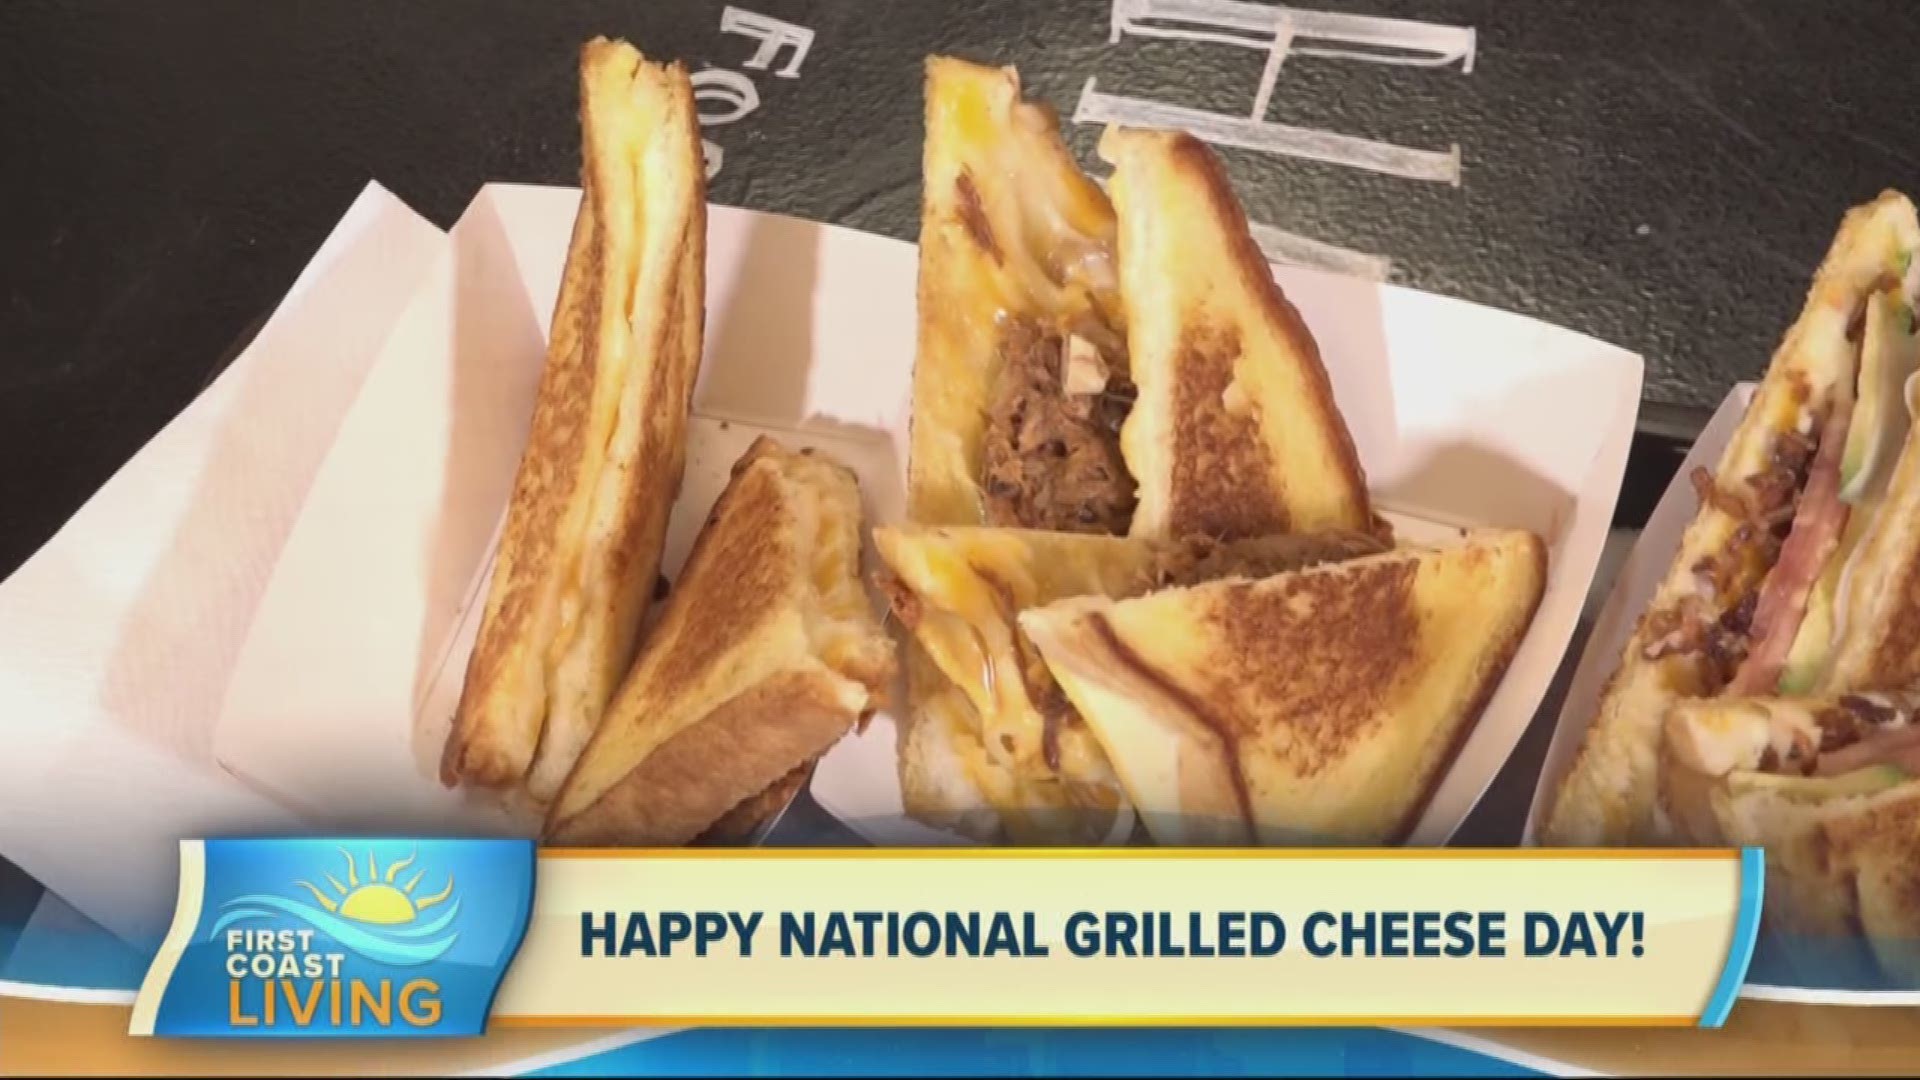 It's a day that will definitely have your 'cheesin', celebrate National Grilled Cheese Day at The Happy Grilled Cheese in Jacksonville!